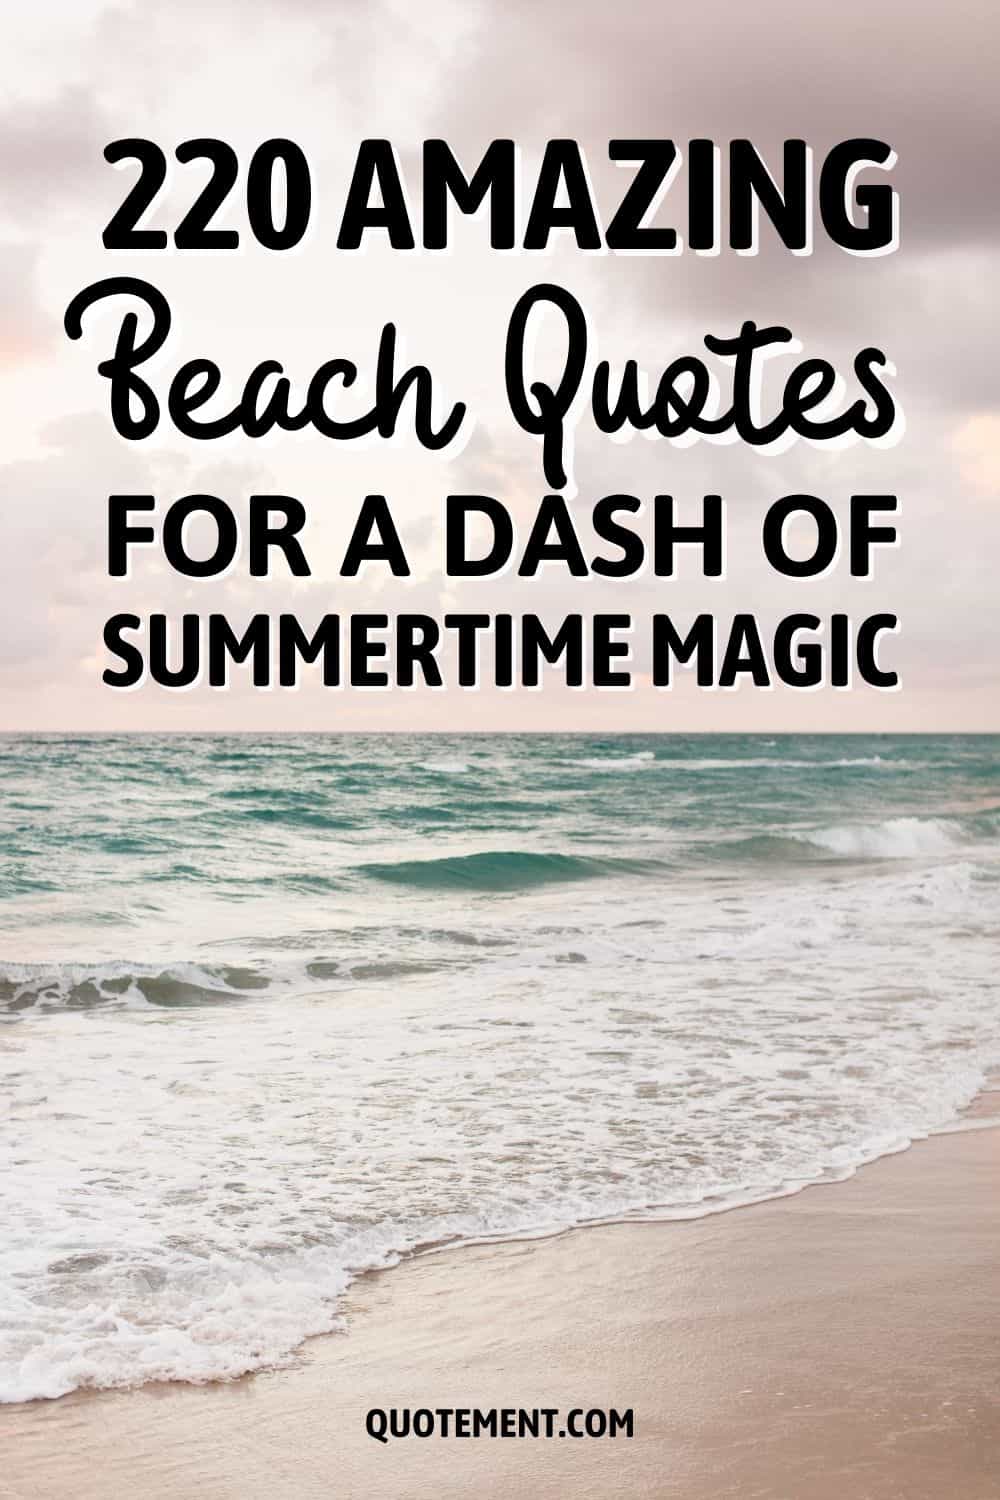 220 Amazing Beach Quotes For A Dash Of Summertime Magic
